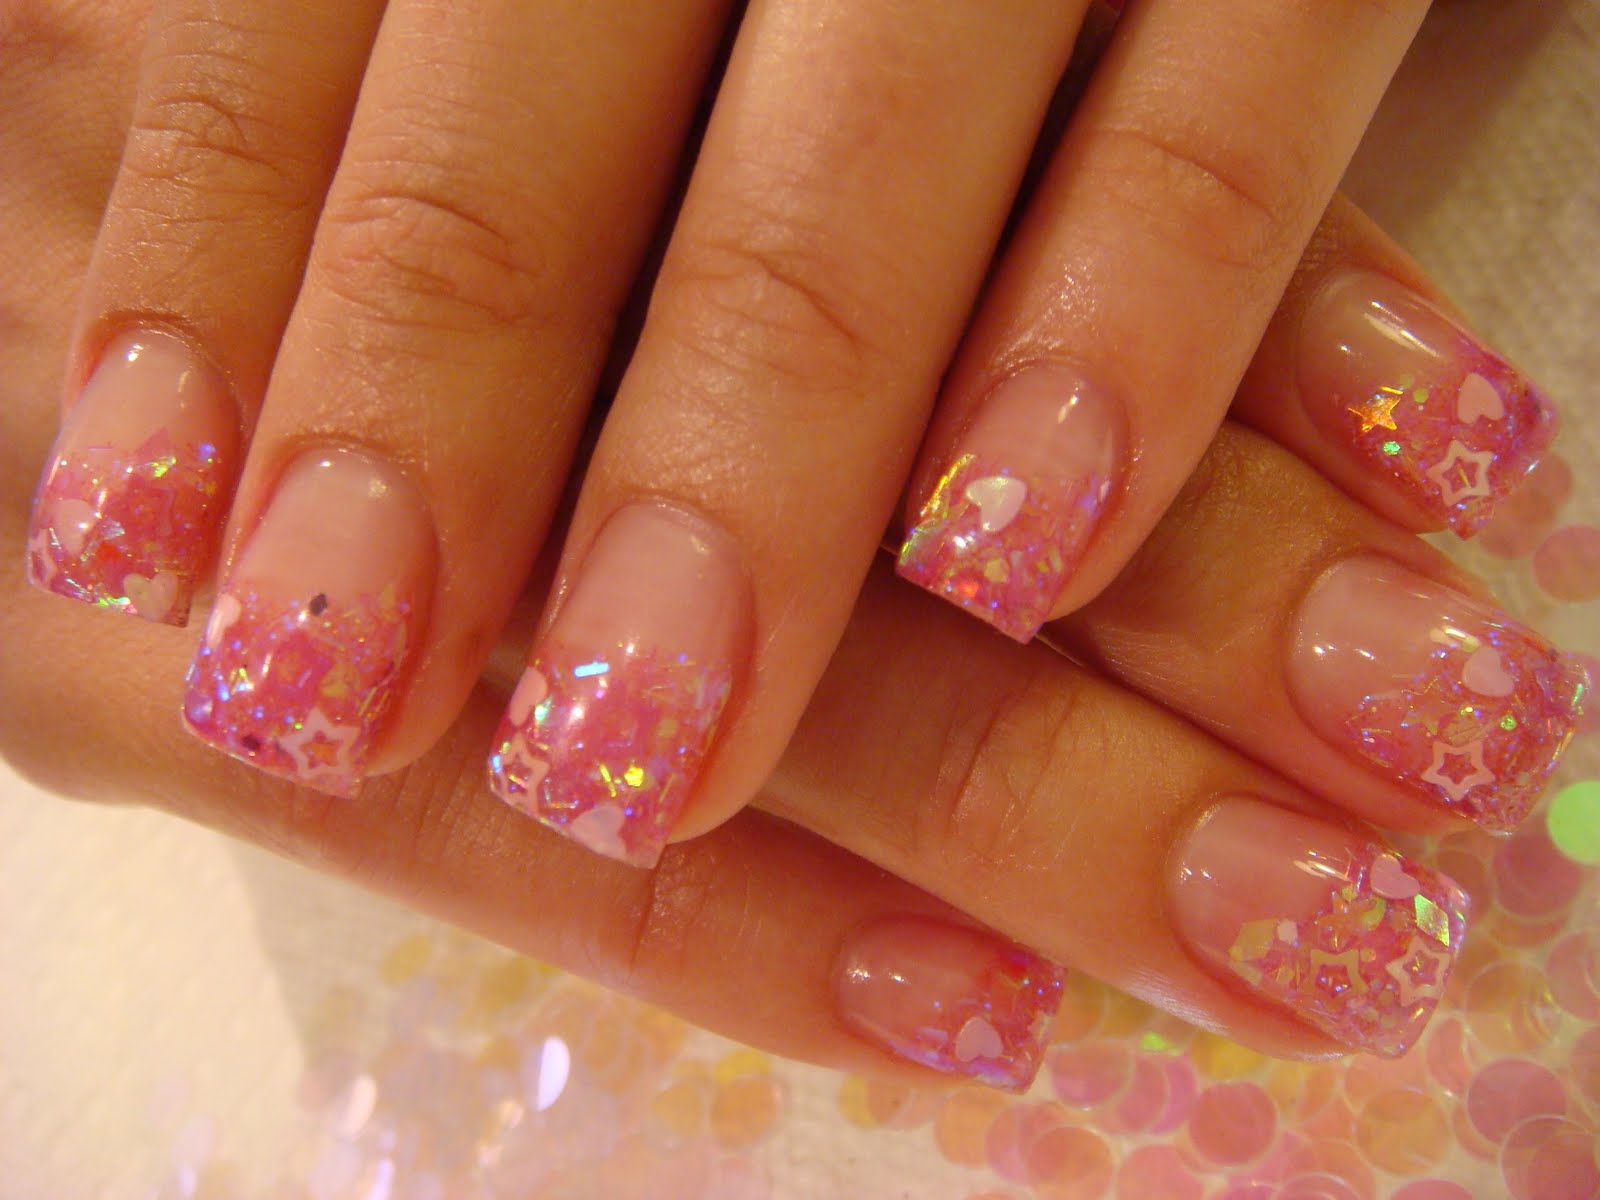 1. Cute Acrylic Nail Designs for Summer - wide 4